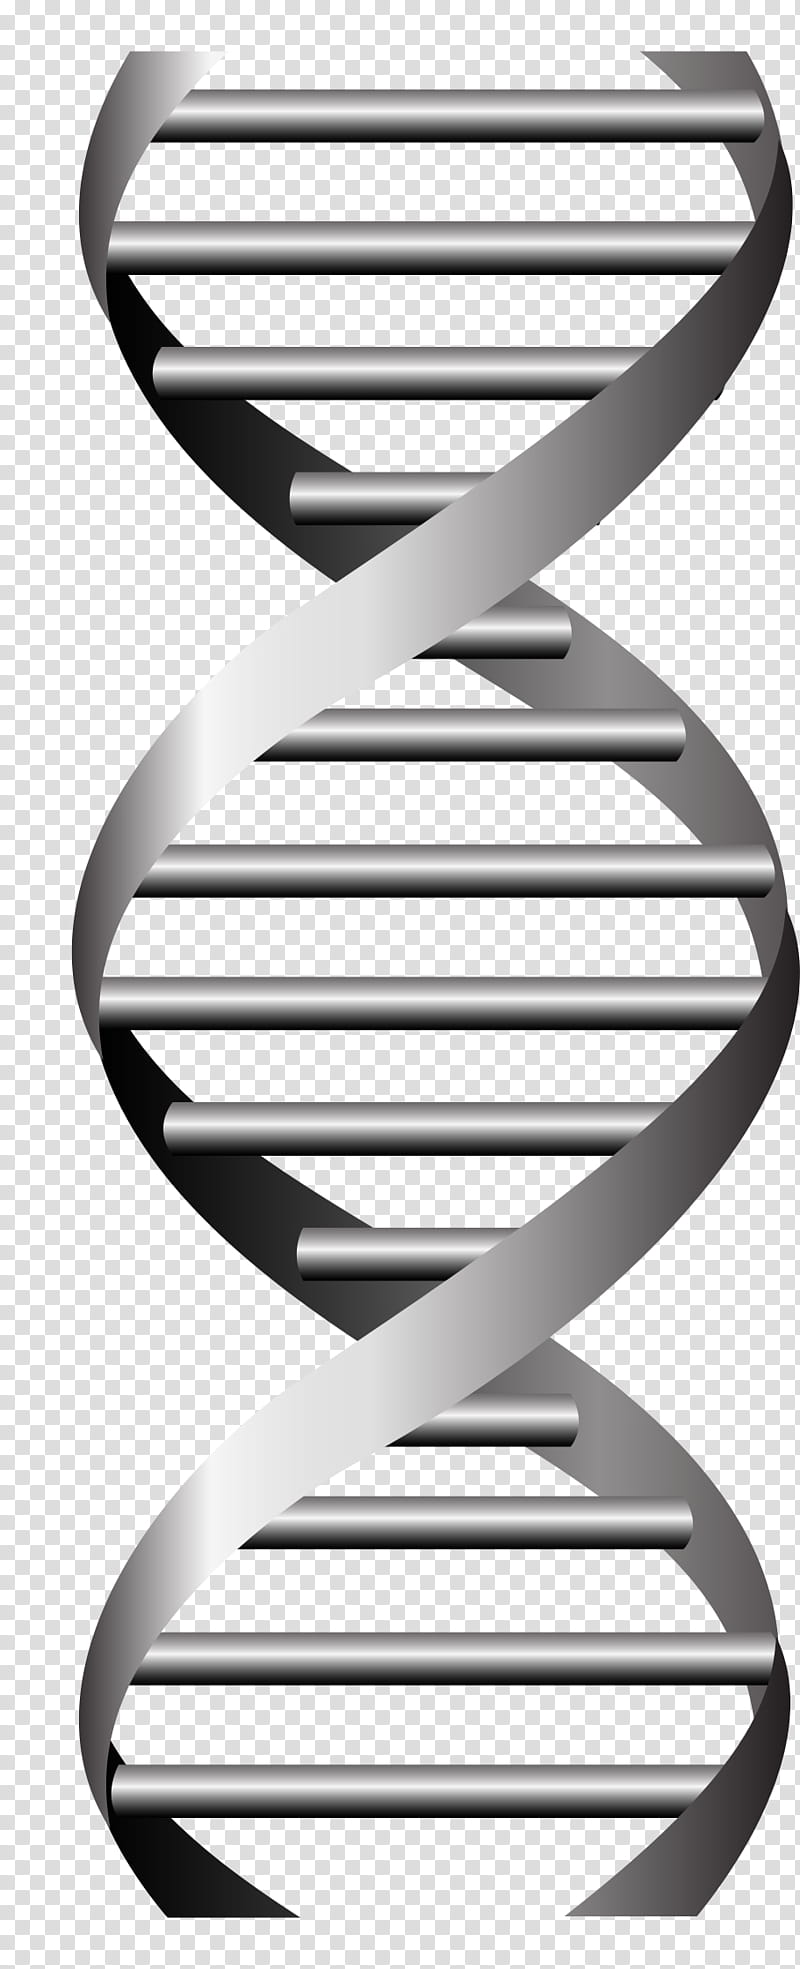 Trophy, Dna, , Nucleic Acid Double Helix, Genetics, Stairs, Logo, Furniture transparent background PNG clipart